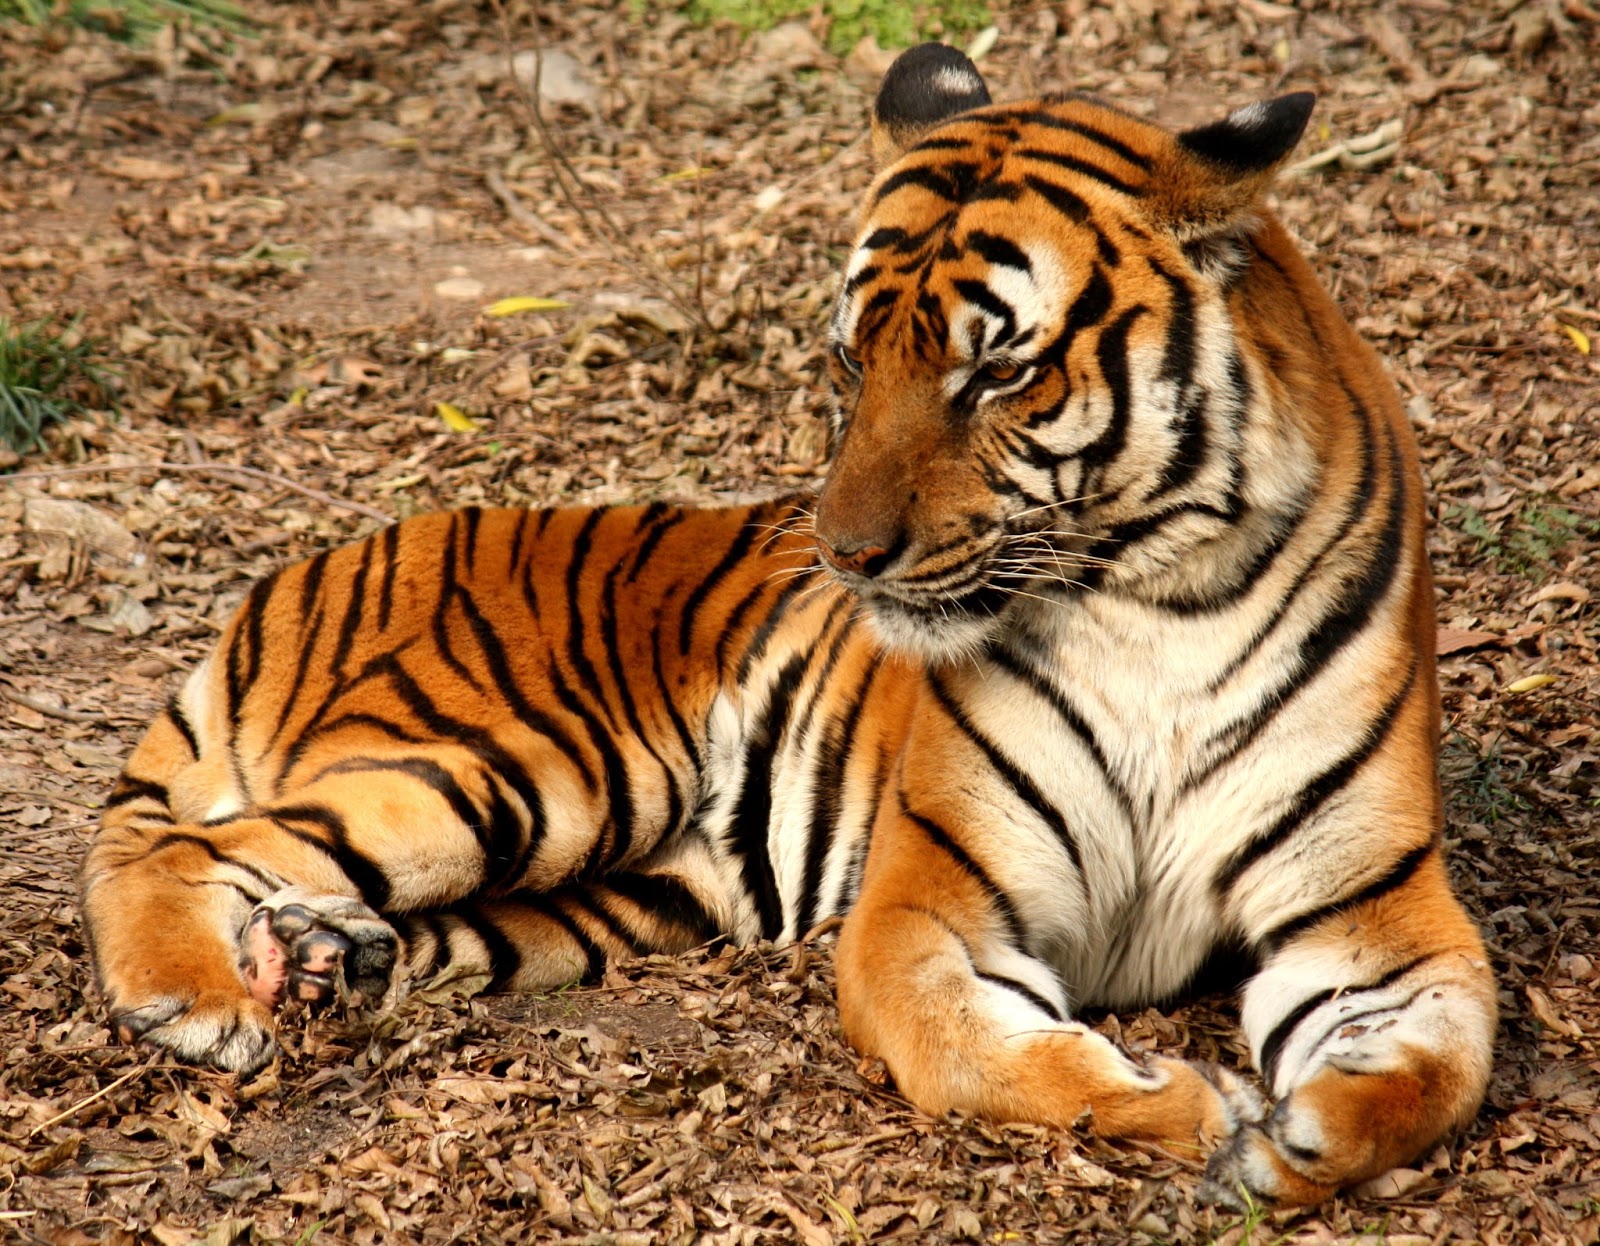 Hd Images Of The Wild Animals, Wallpapers And Backgrounds - Orange And Black Striped Tiger - HD Wallpaper 